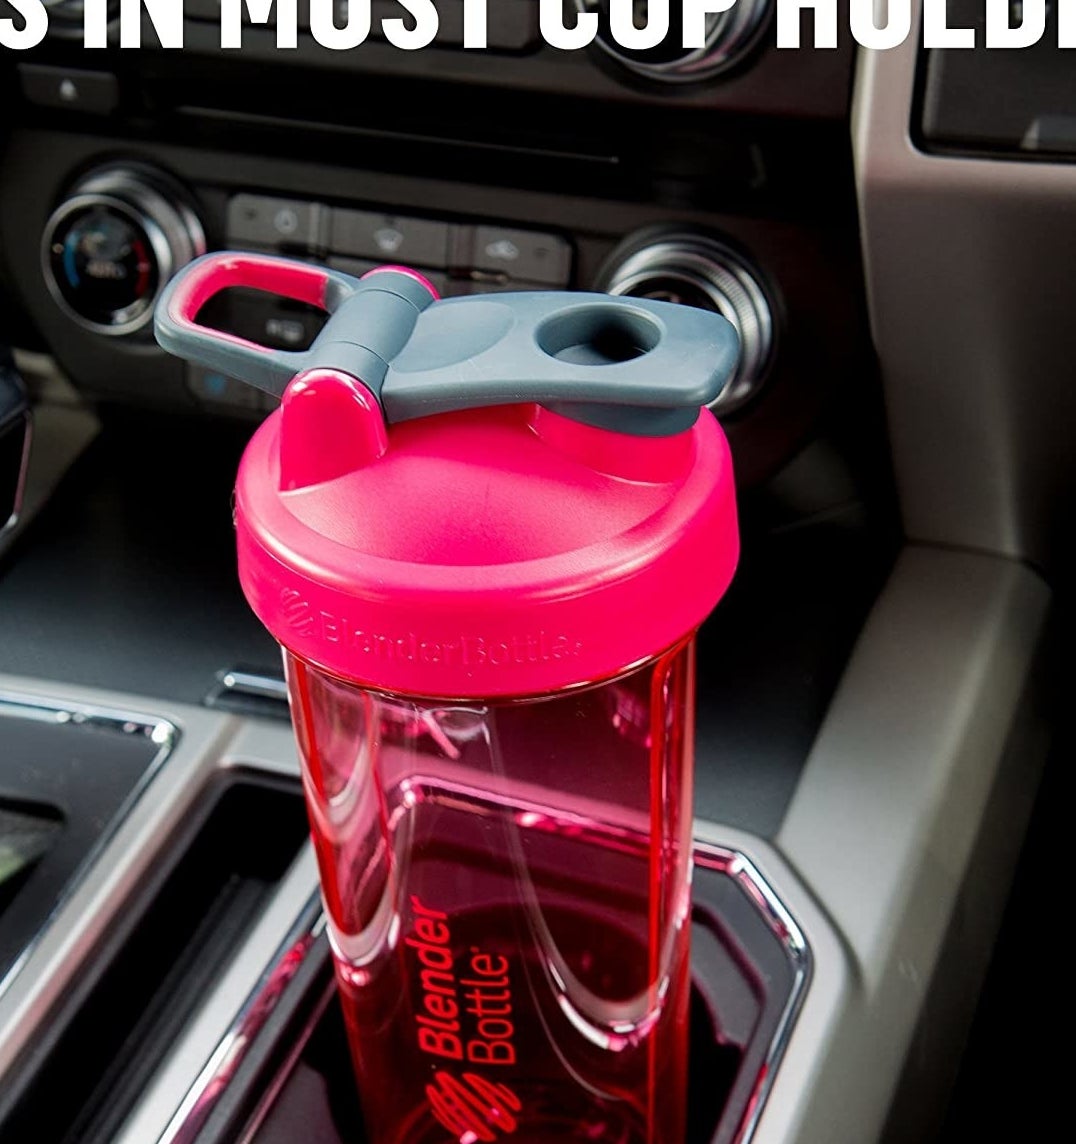 A blenderbottle cup in a cupholder